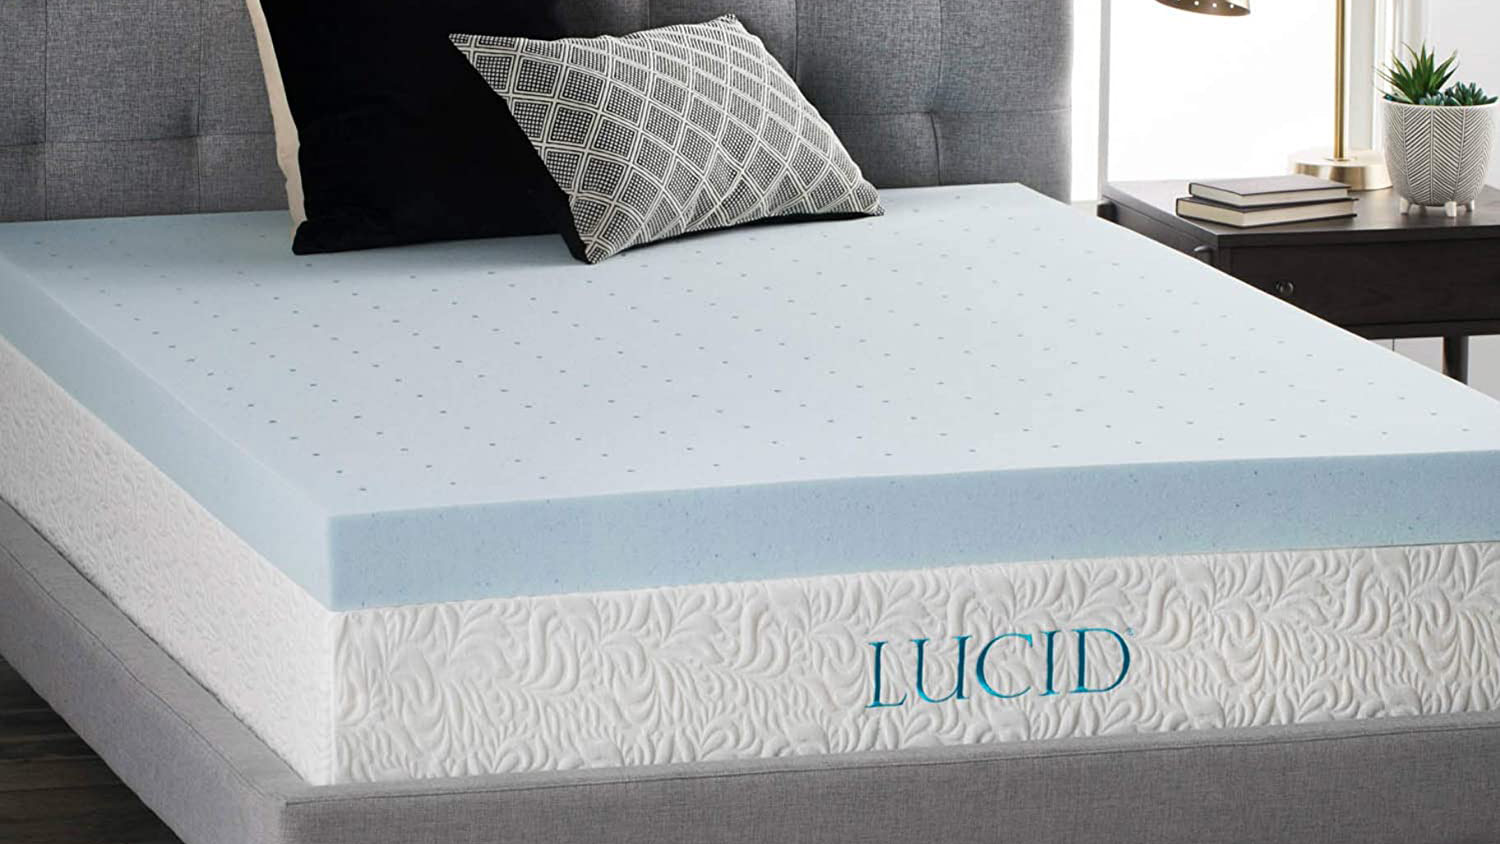 The Lucid 4 Inch Gel Mattress Topper placed on a white mattress and dressed with pillows